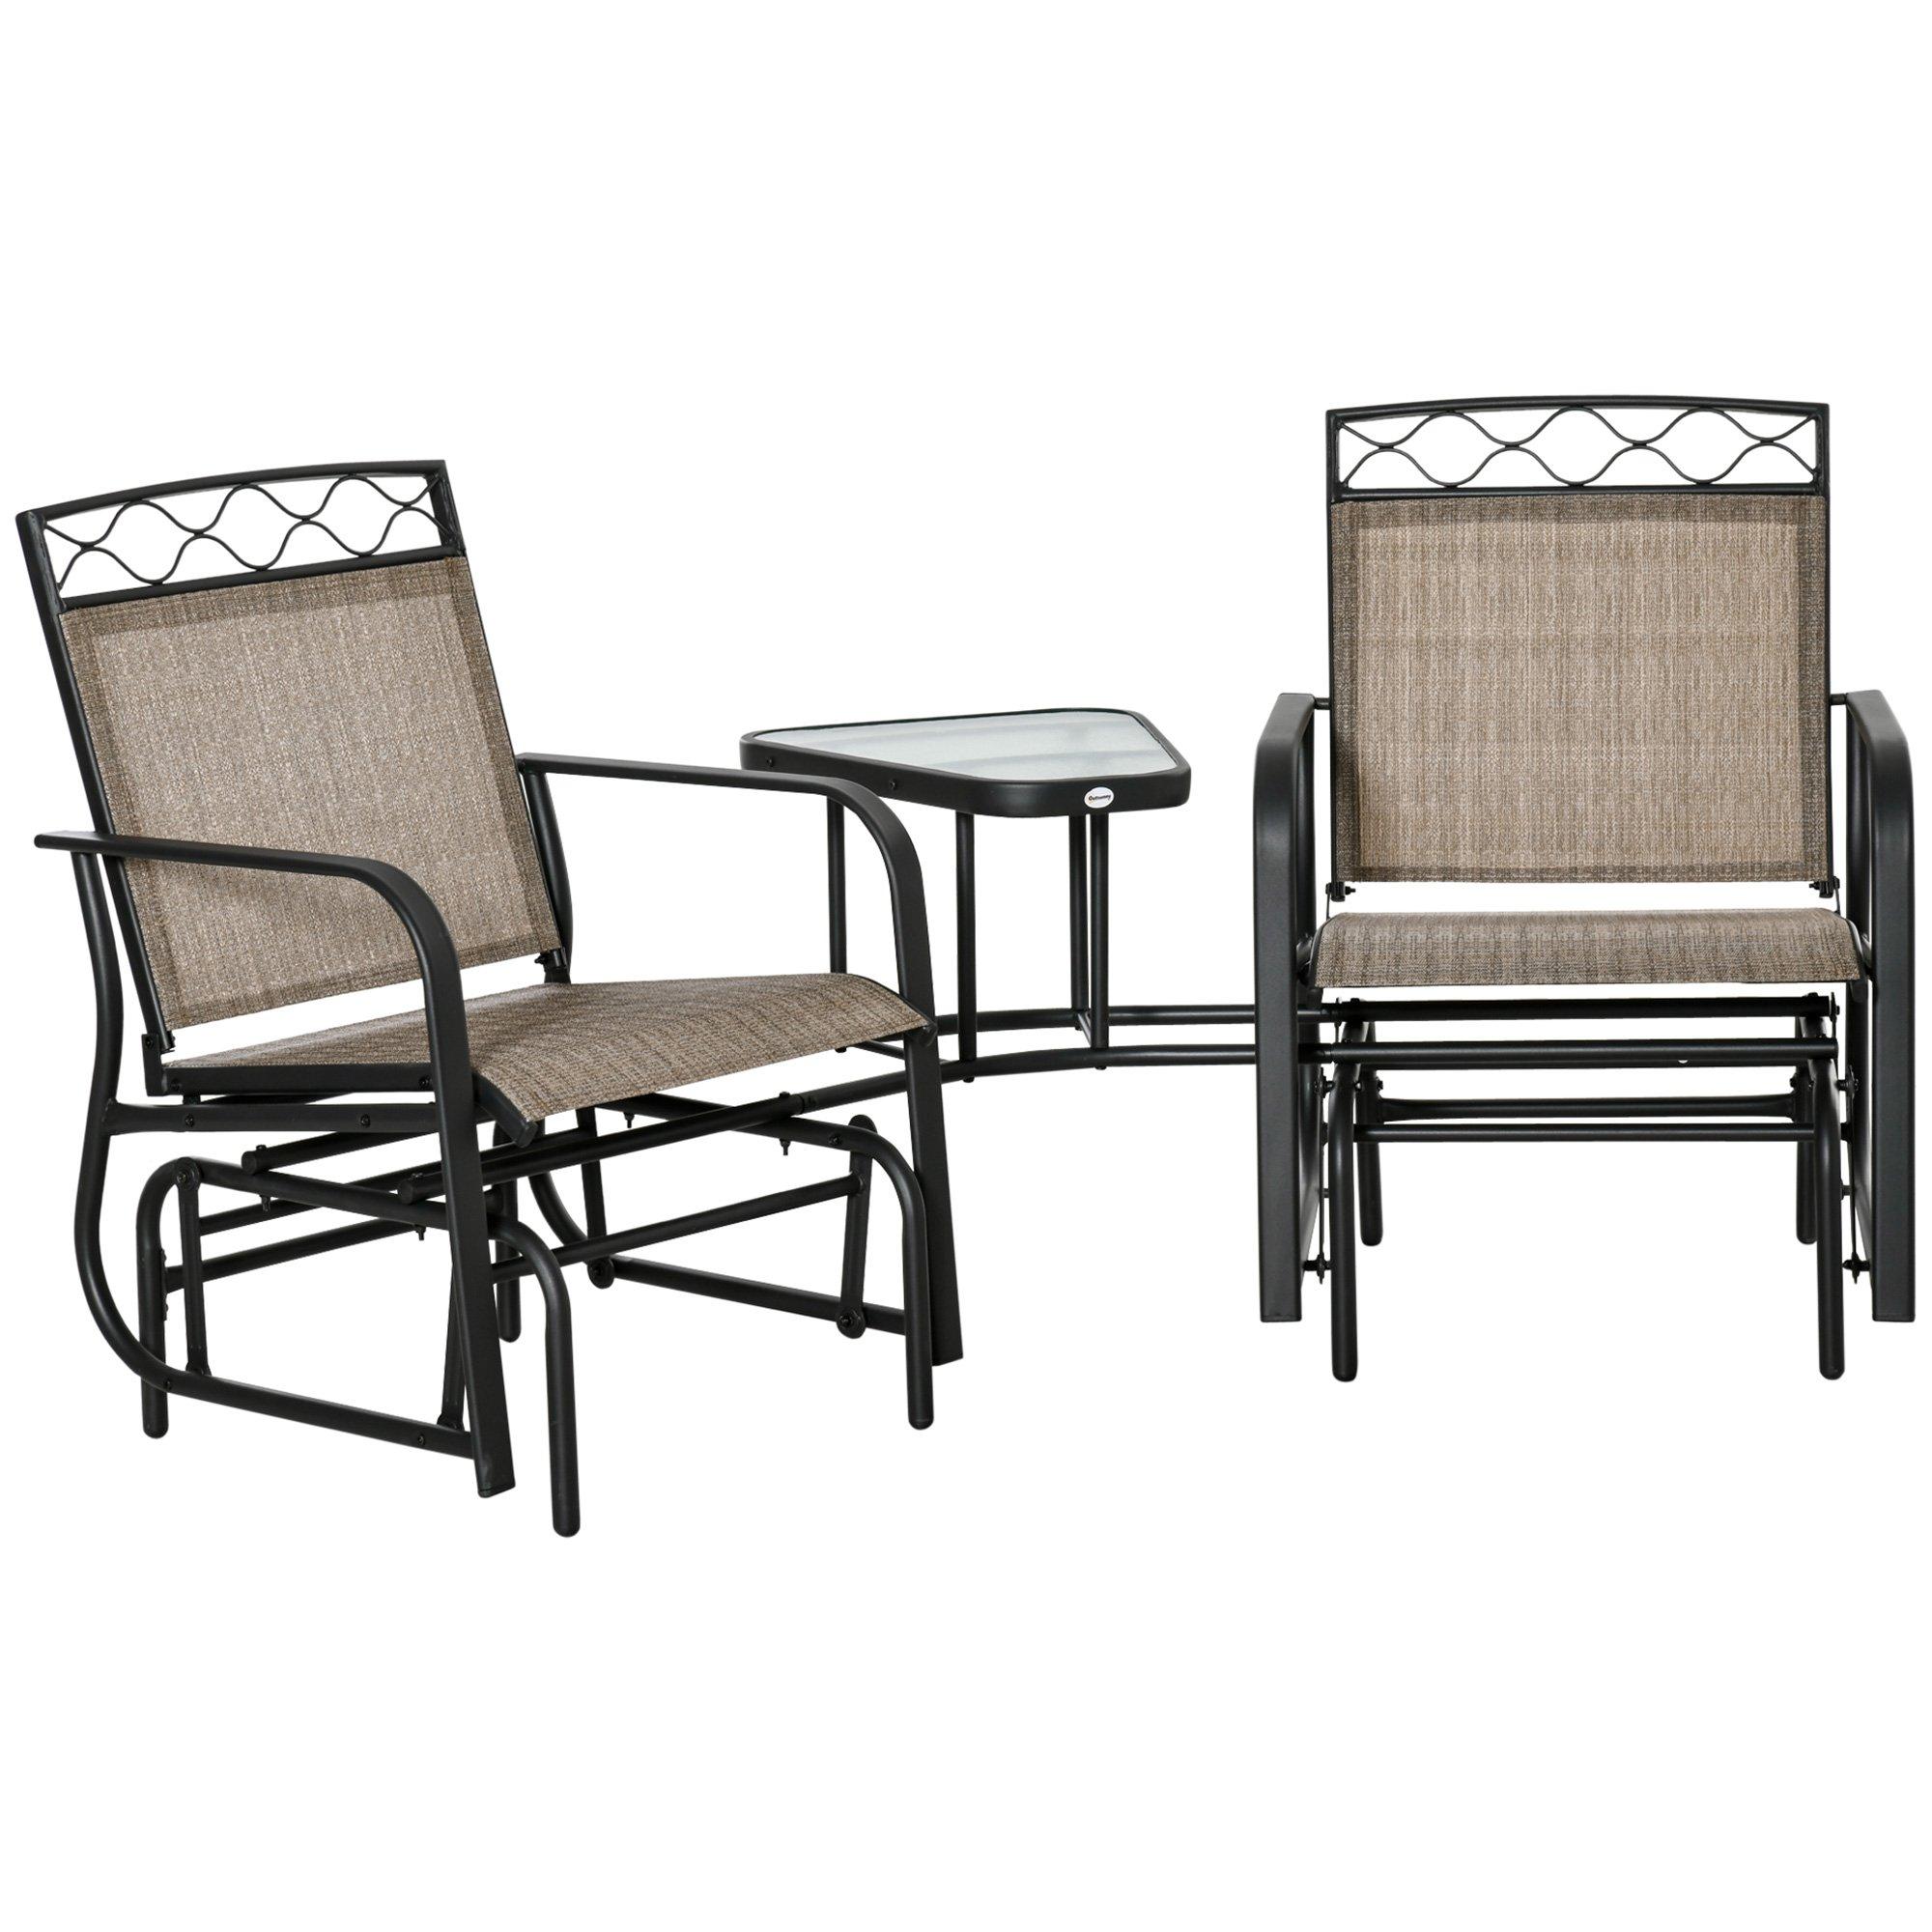 2-Person Outdoor Glider Rocker Chair with Center Table for Backyard